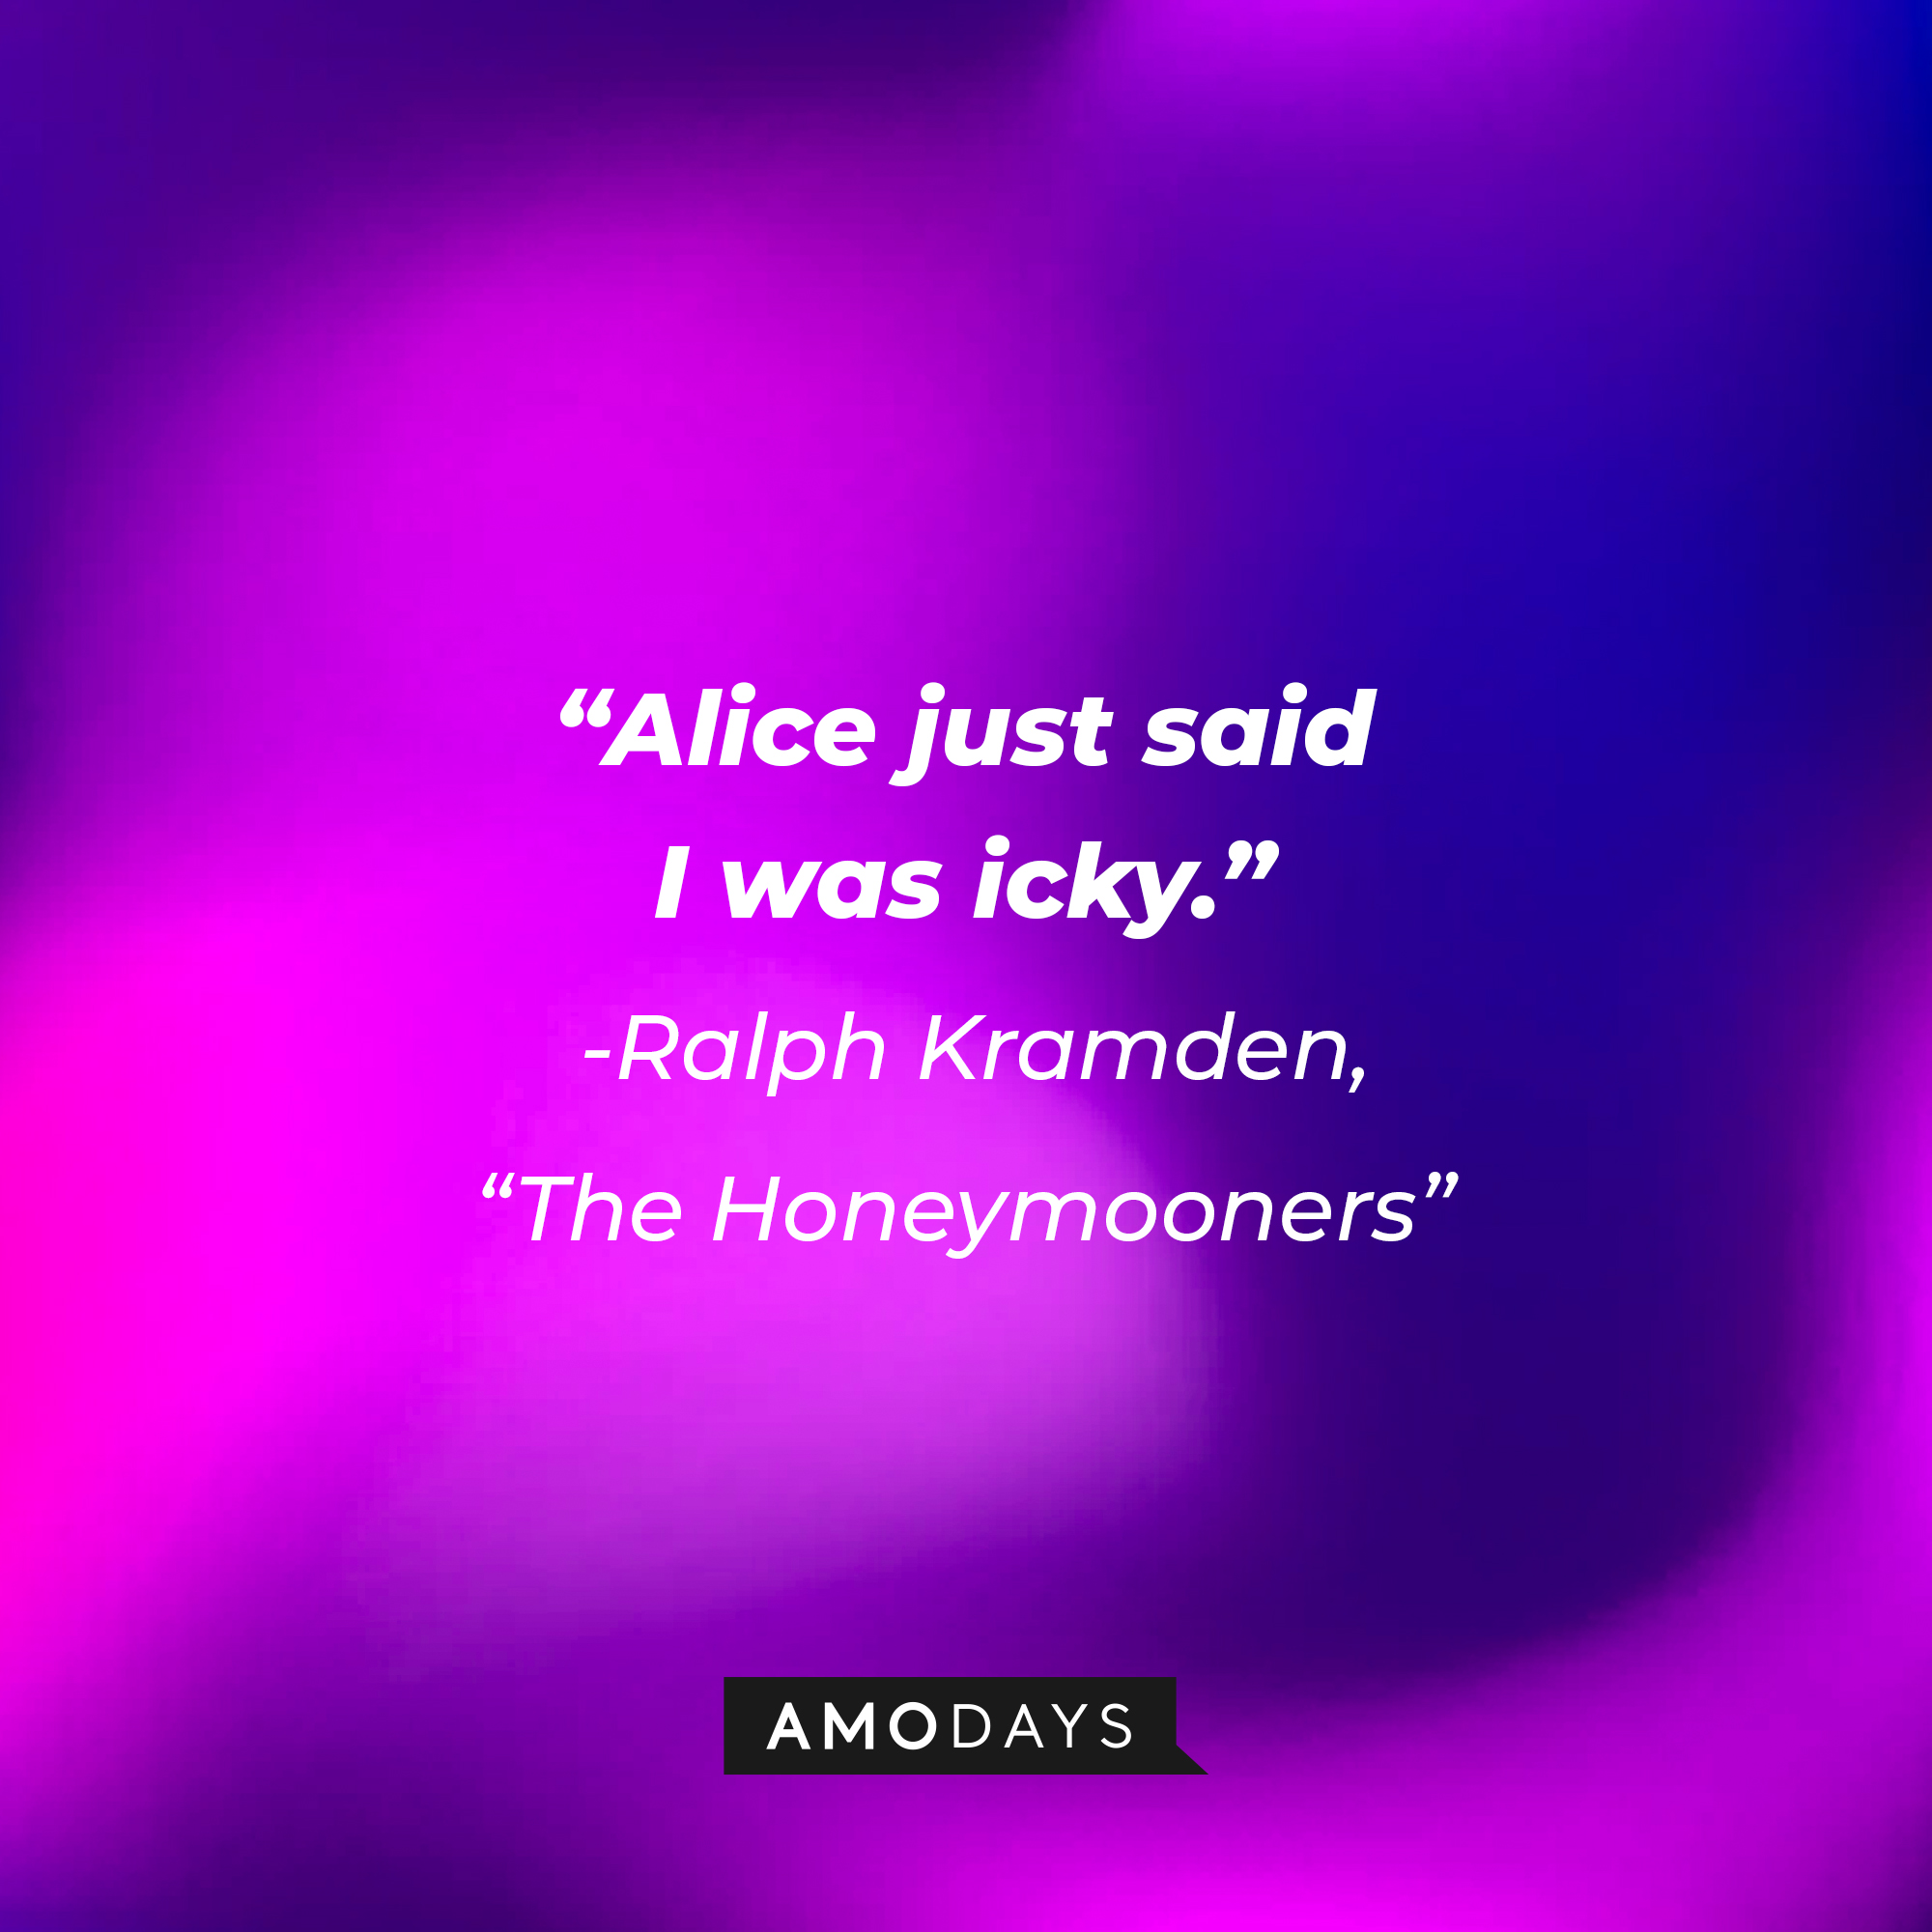 A quote from "The Honeymooners" star Ralph Kramden: "Alice just said I was icky." | So